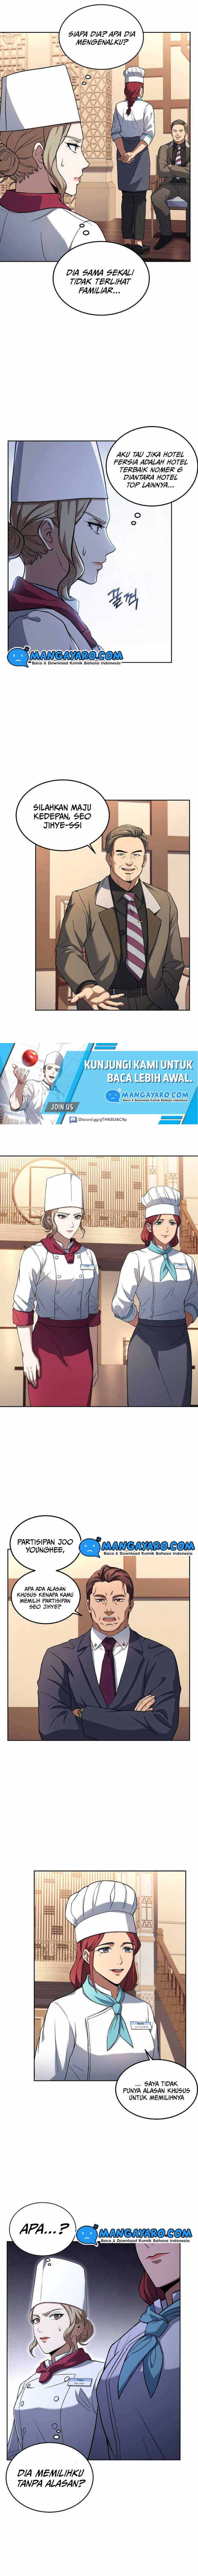 Youngest Chef From the 3rd Rate Hotel Chapter 30